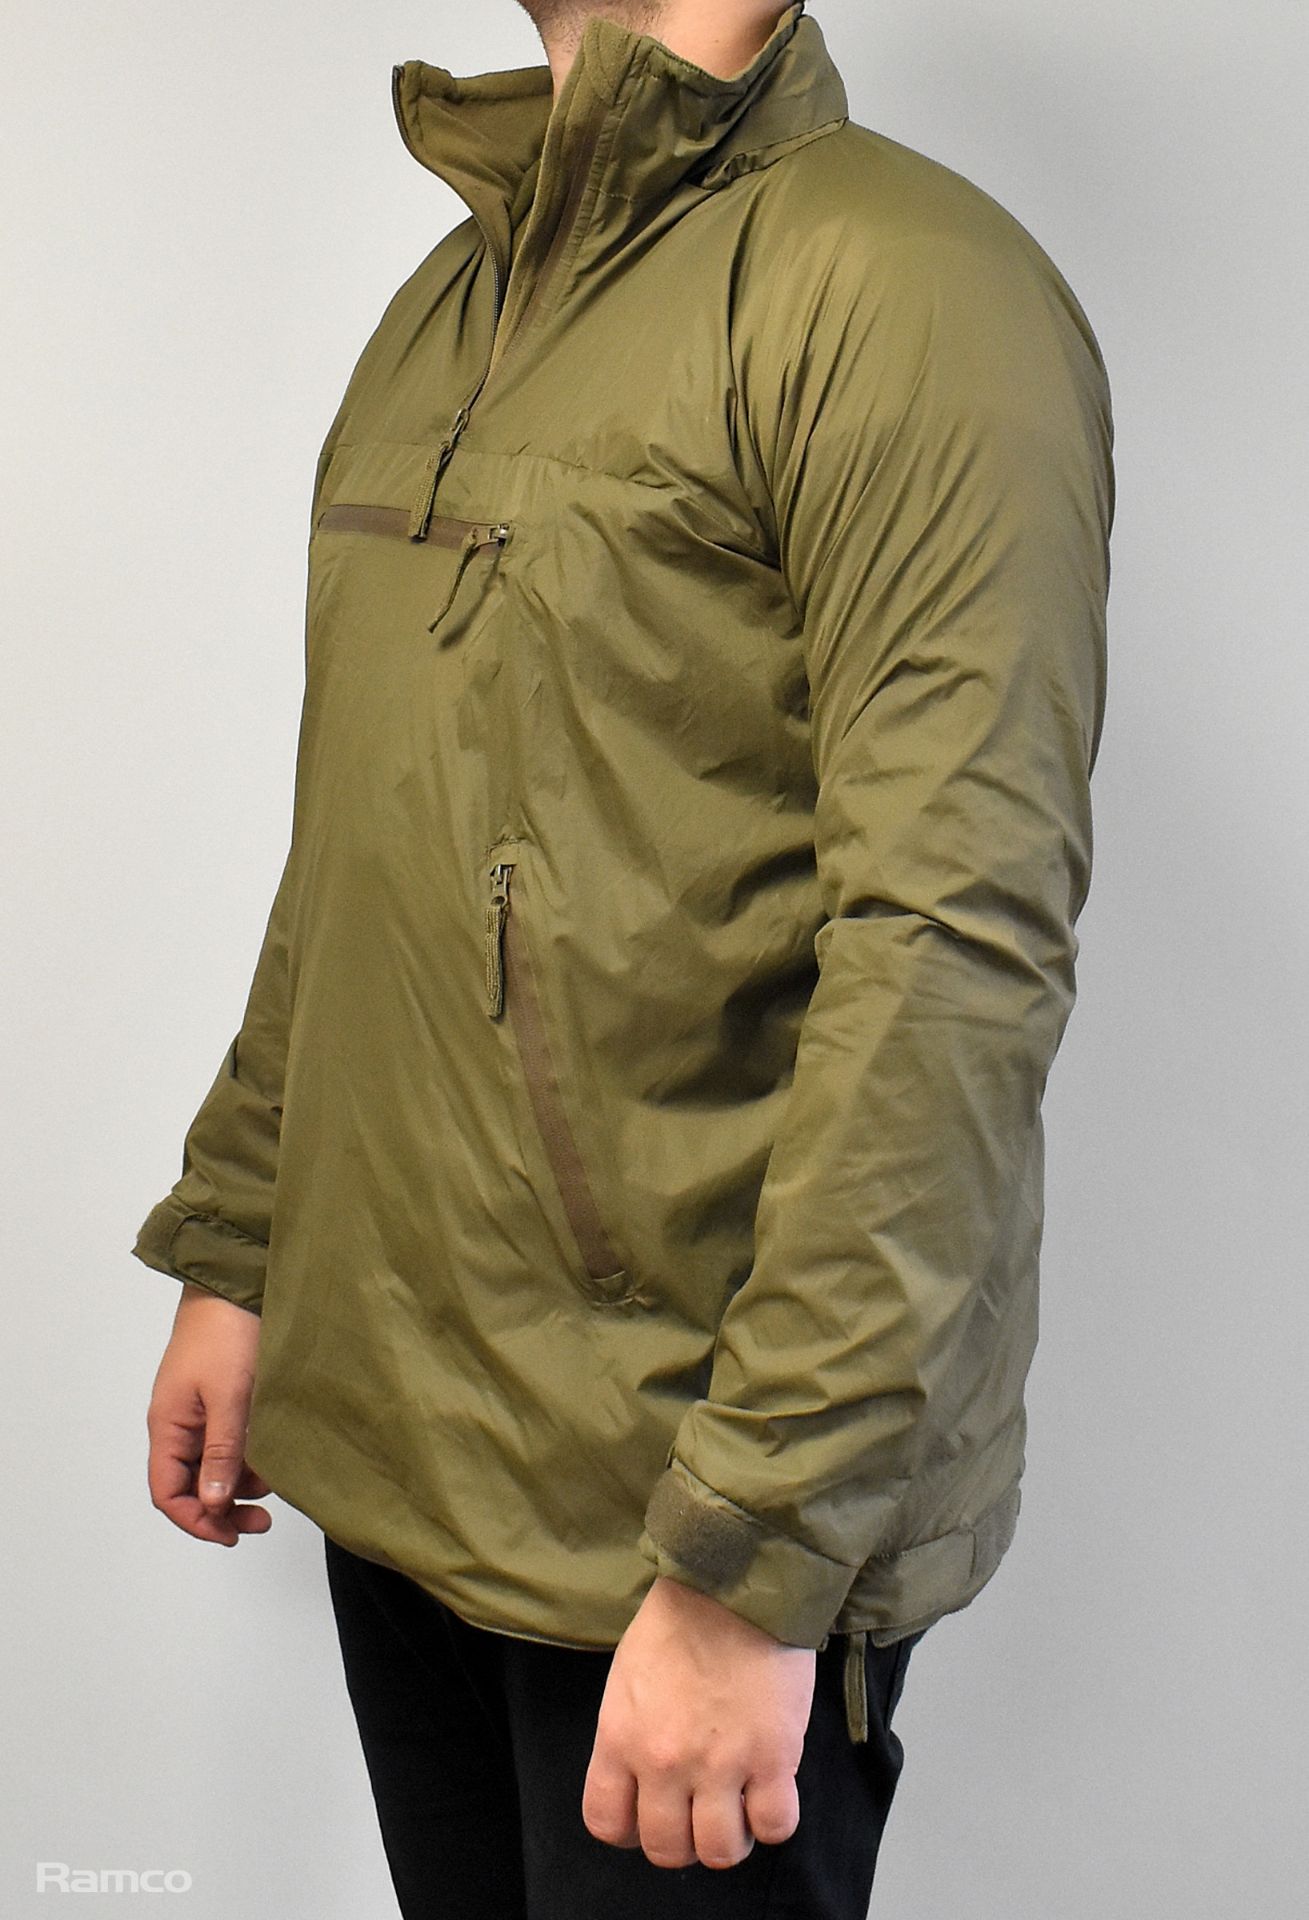 65x British Army MTP lightweight thermal smocks - mixed grades and sizes - Image 2 of 6